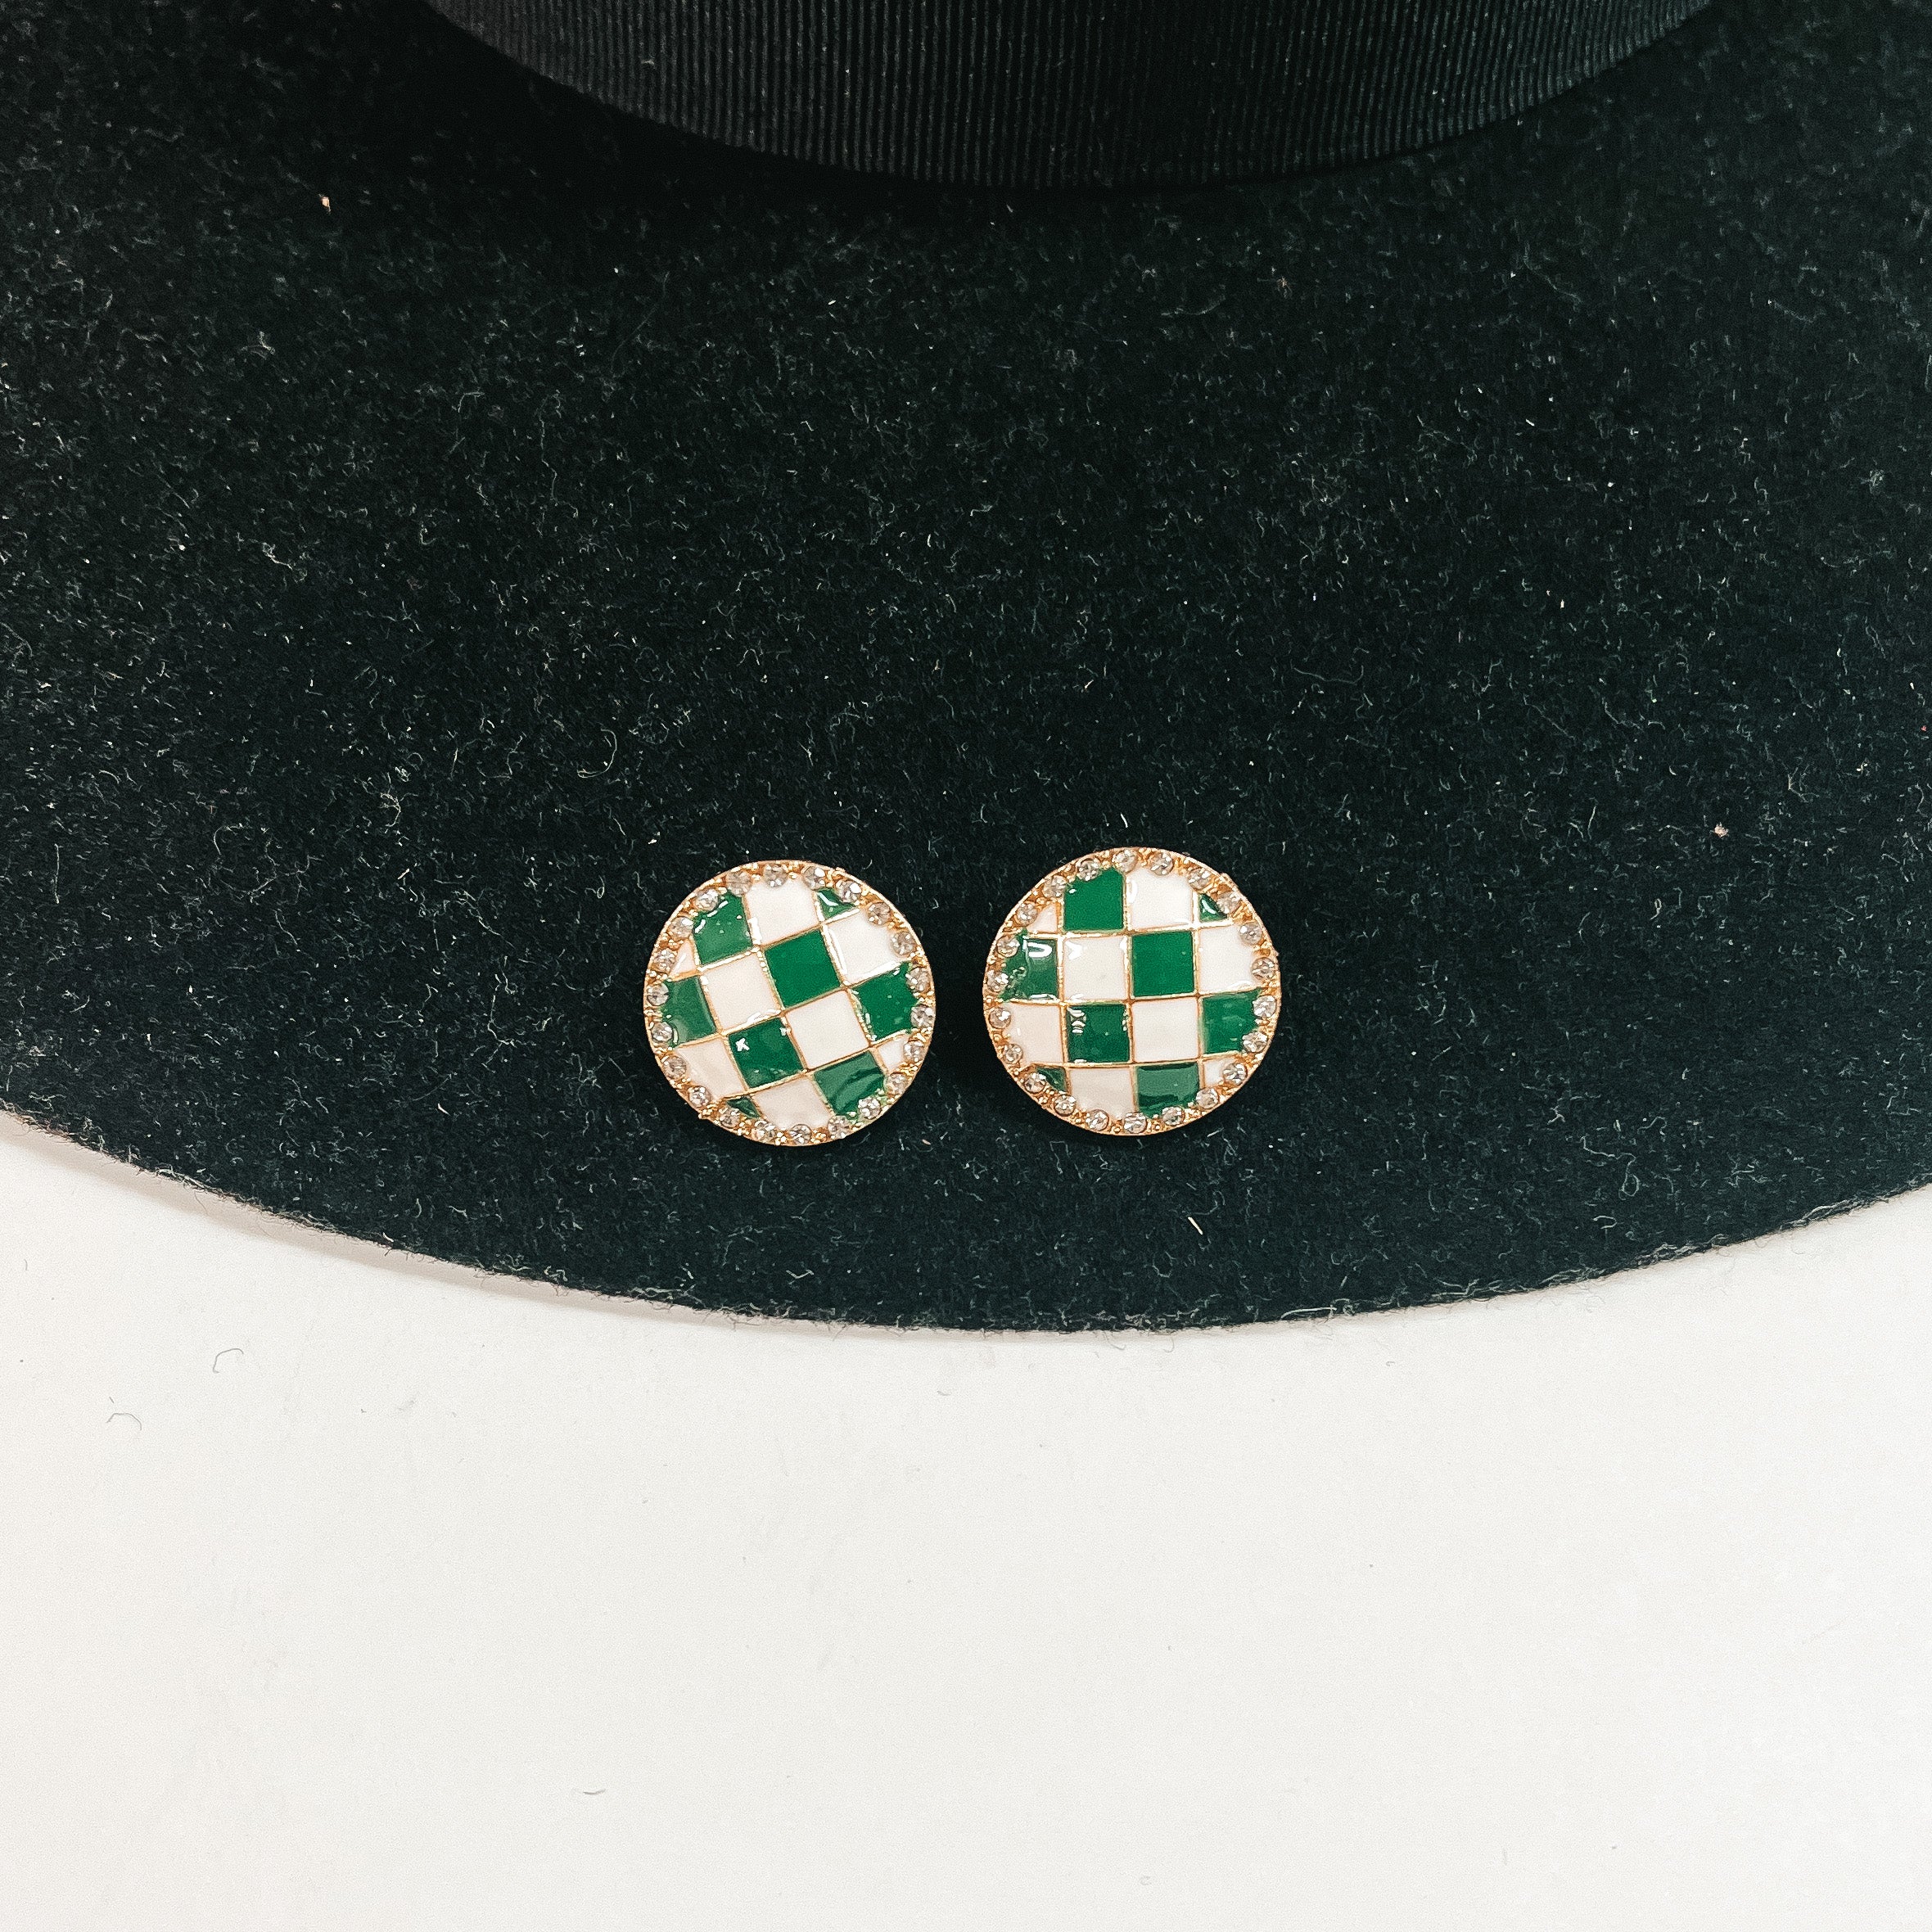 This is a pair of checkered patterned stud earrings in white/green in a gold  setting with clear crystals all around. This pair of earrings is laying on a  black felt hat brim and on a white background.